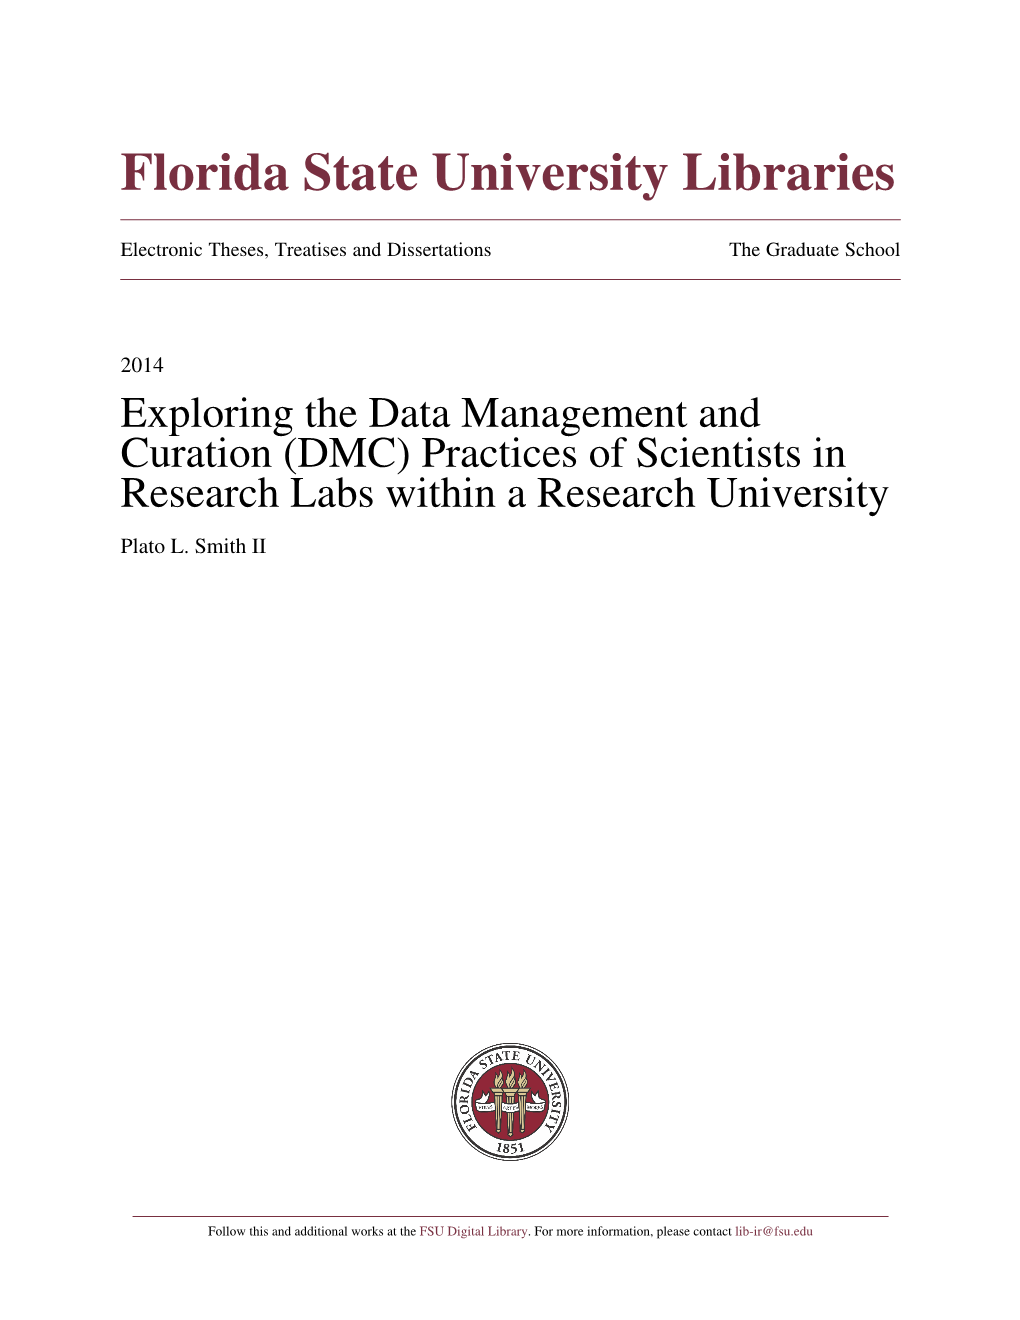 Exploring the Data Management and Curation (DMC) Practices of Scientists in Research Labs Within a Research University Plato L